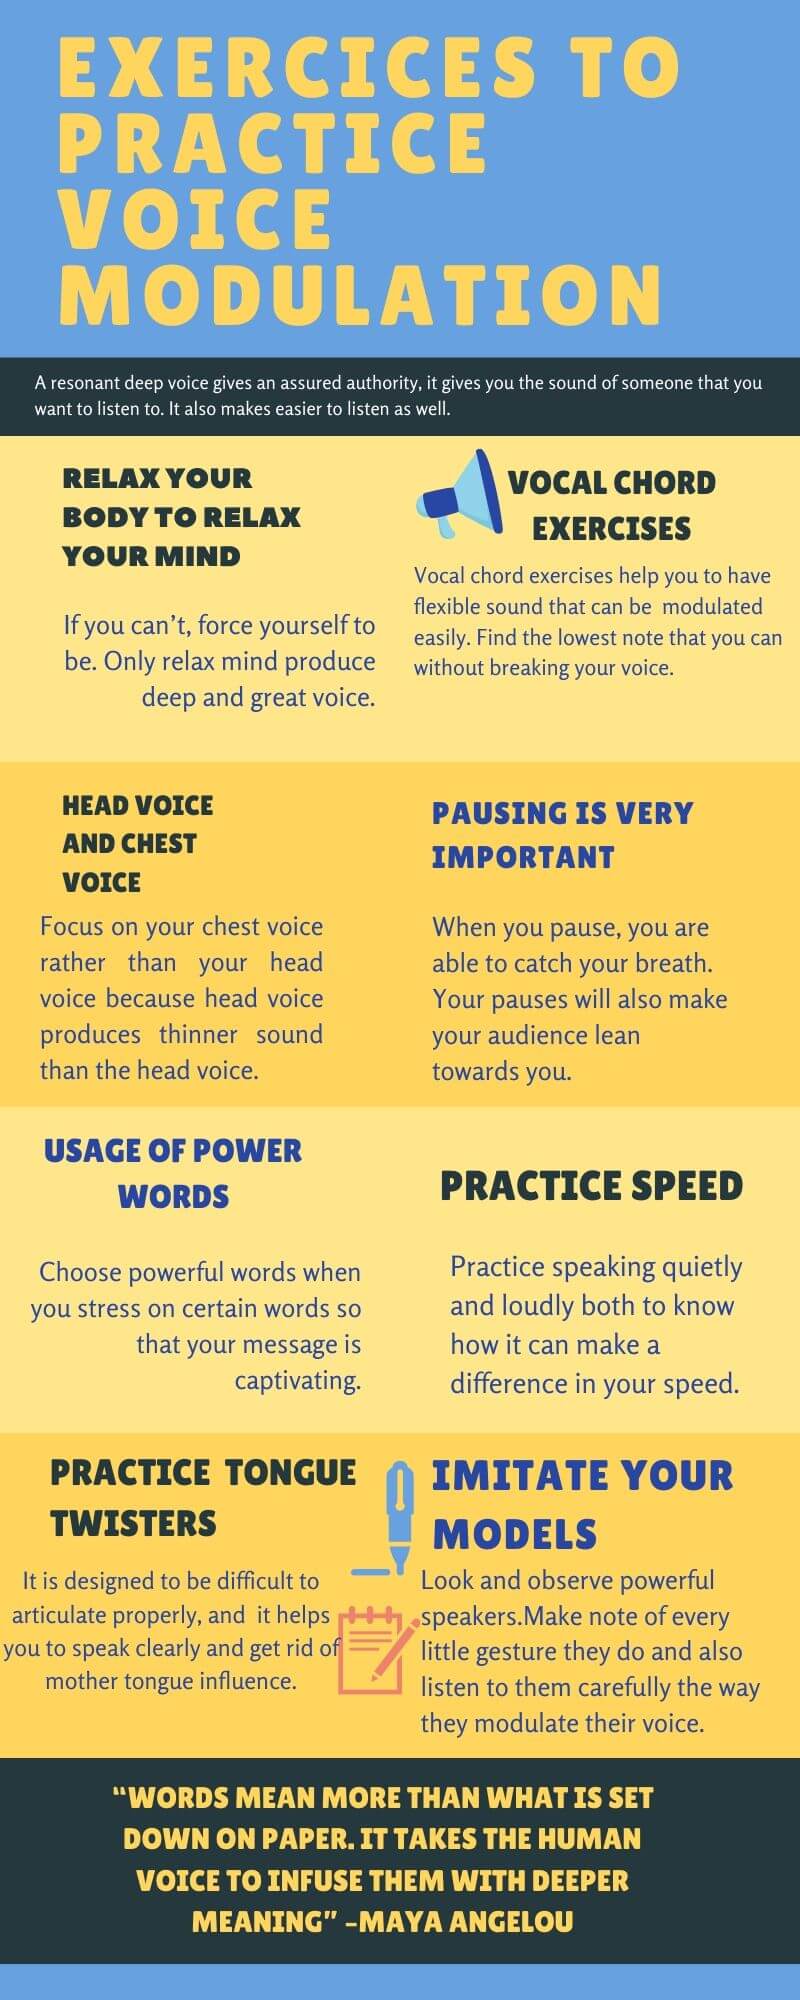 Practices for Voice Modulation